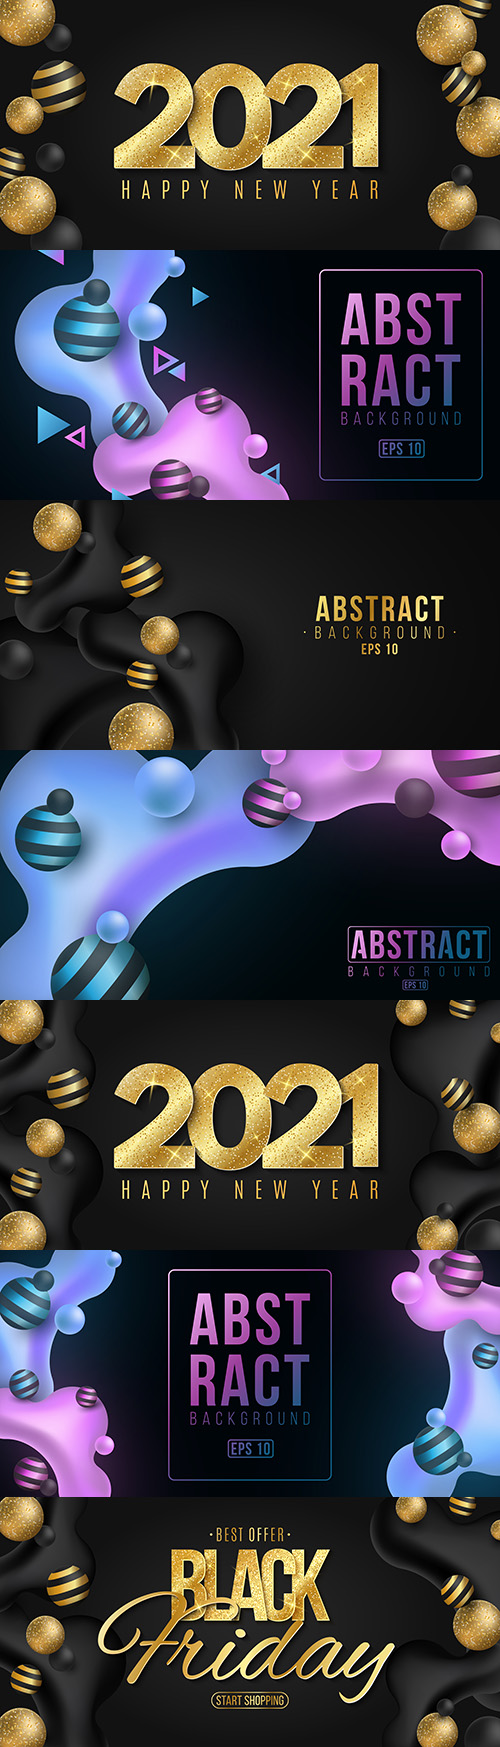 Elegant dark background New Year 2021 and abstract banner
